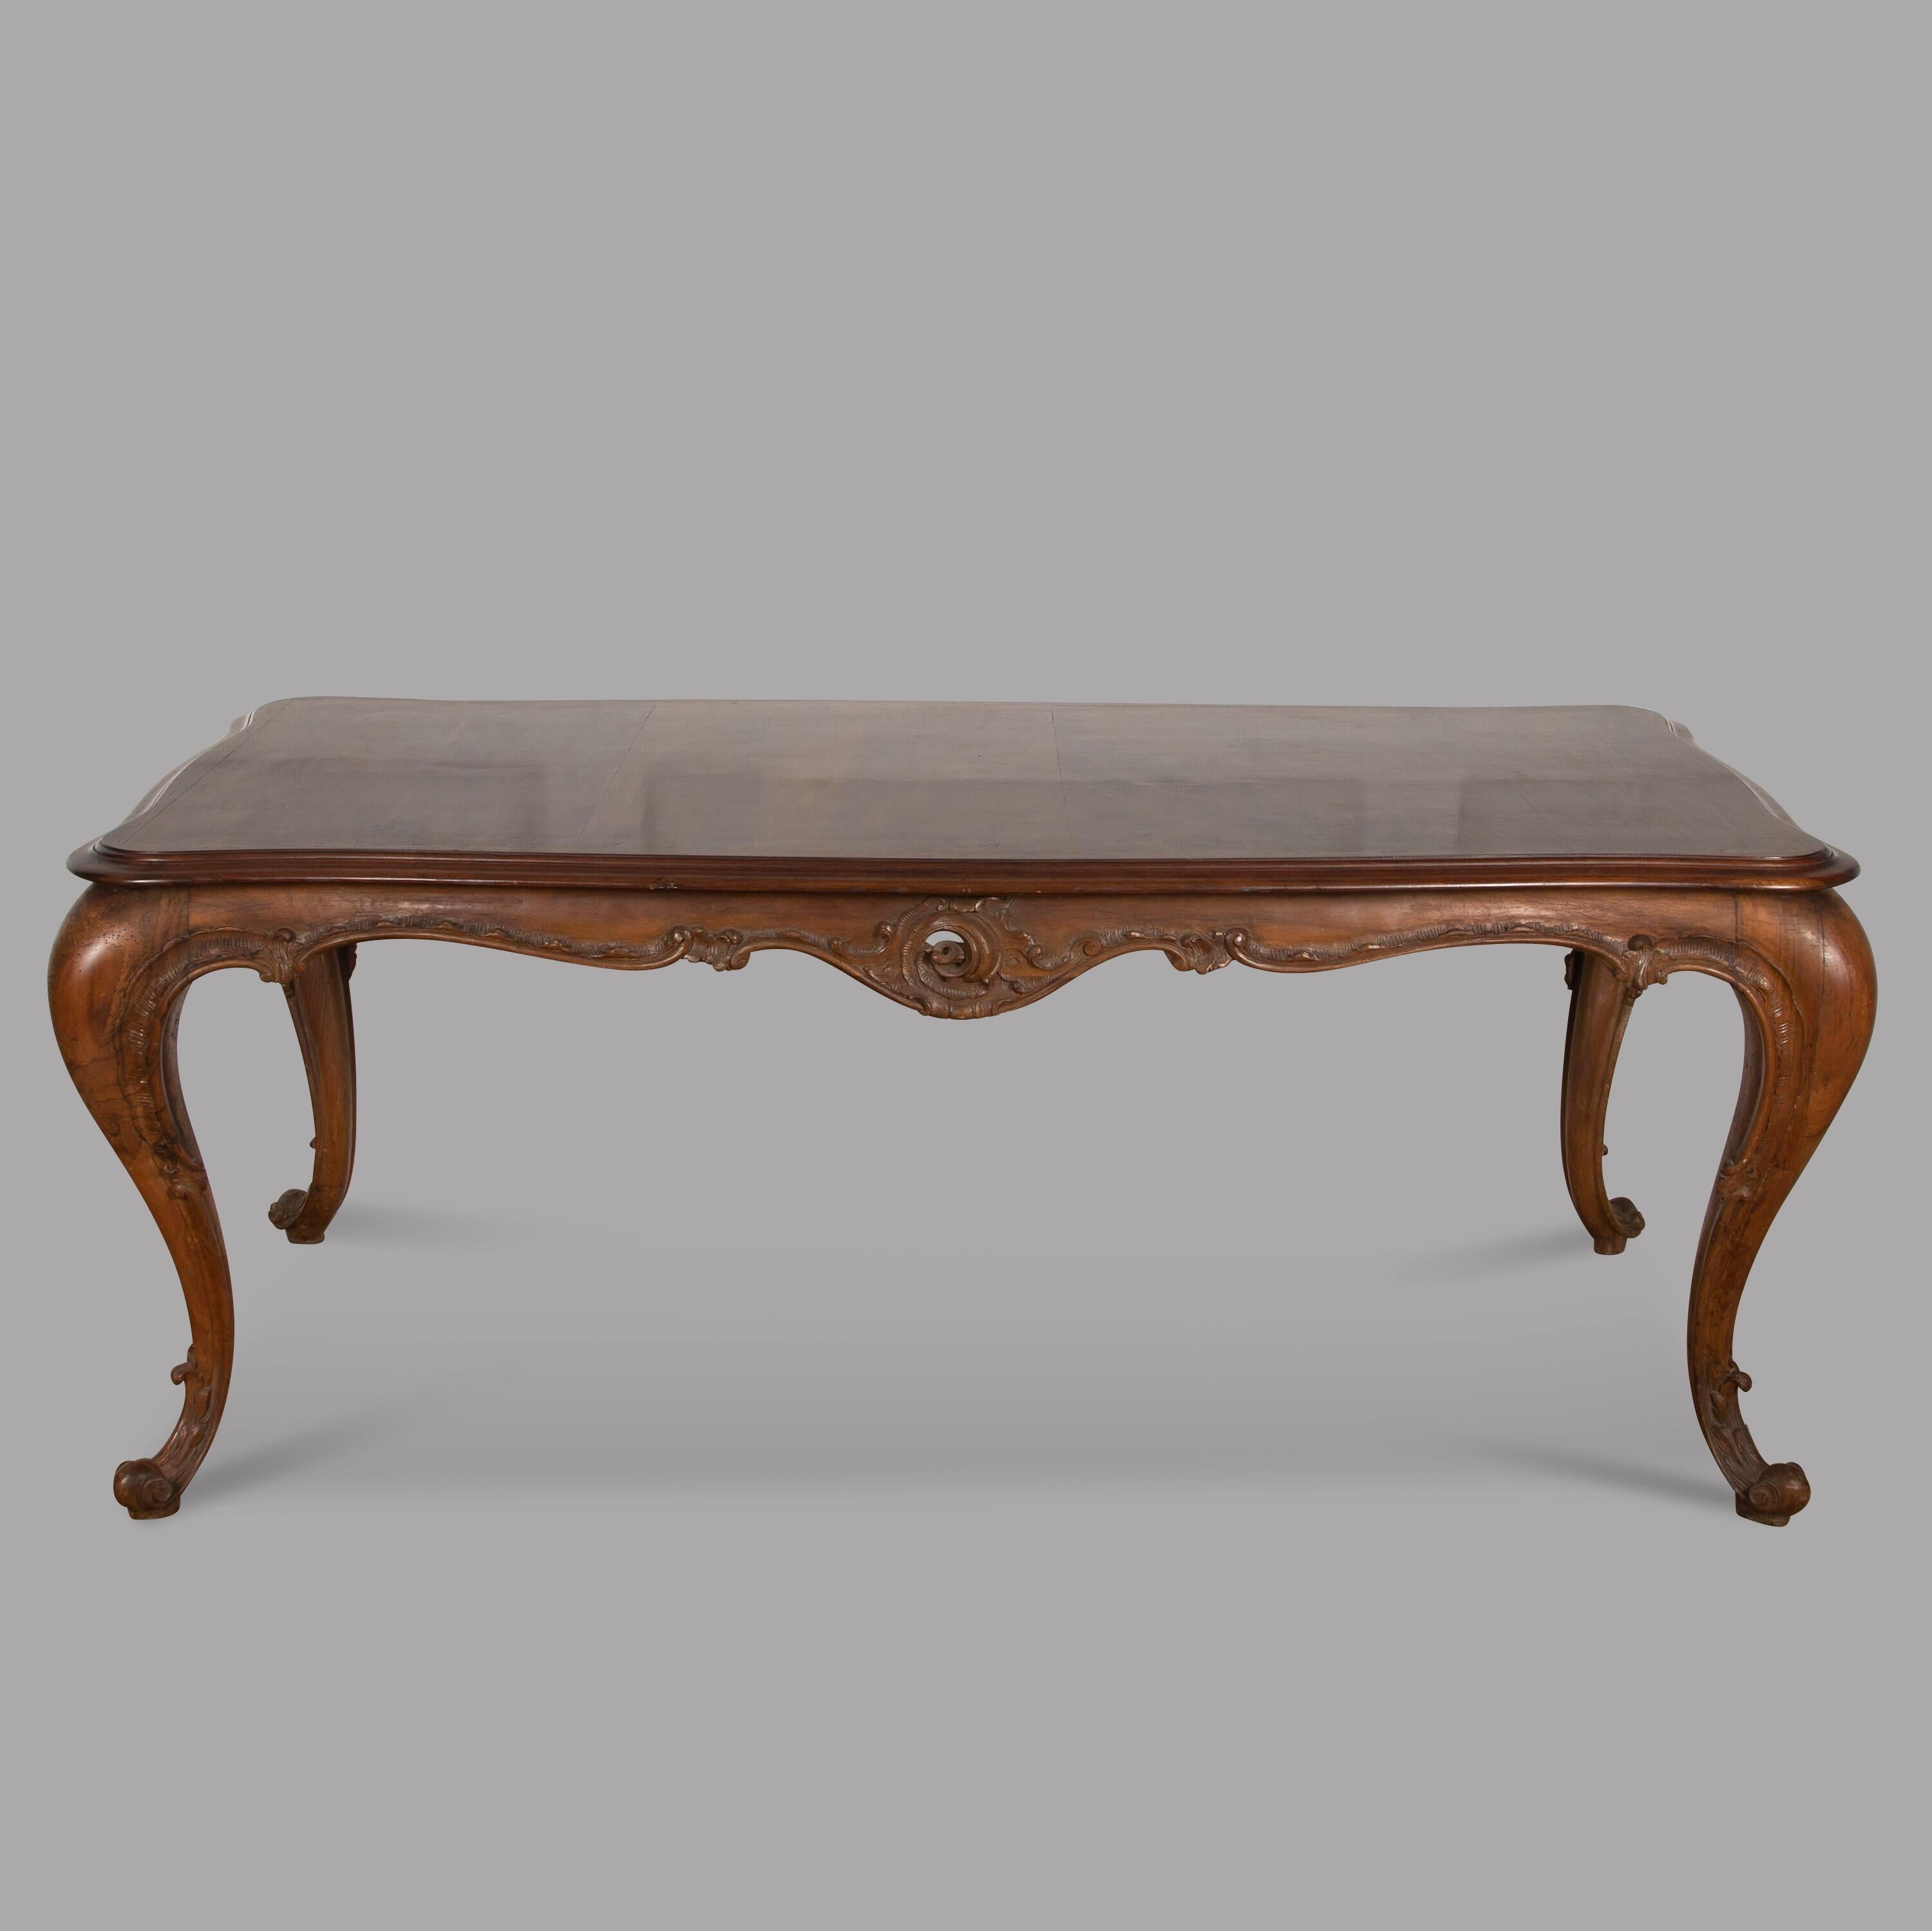 An attractive French walnut table with carved freize sides and cabriole carved legs, will seat eight comfortably.

Measures: length 200 cm, width 100 cm and height 78 cm.